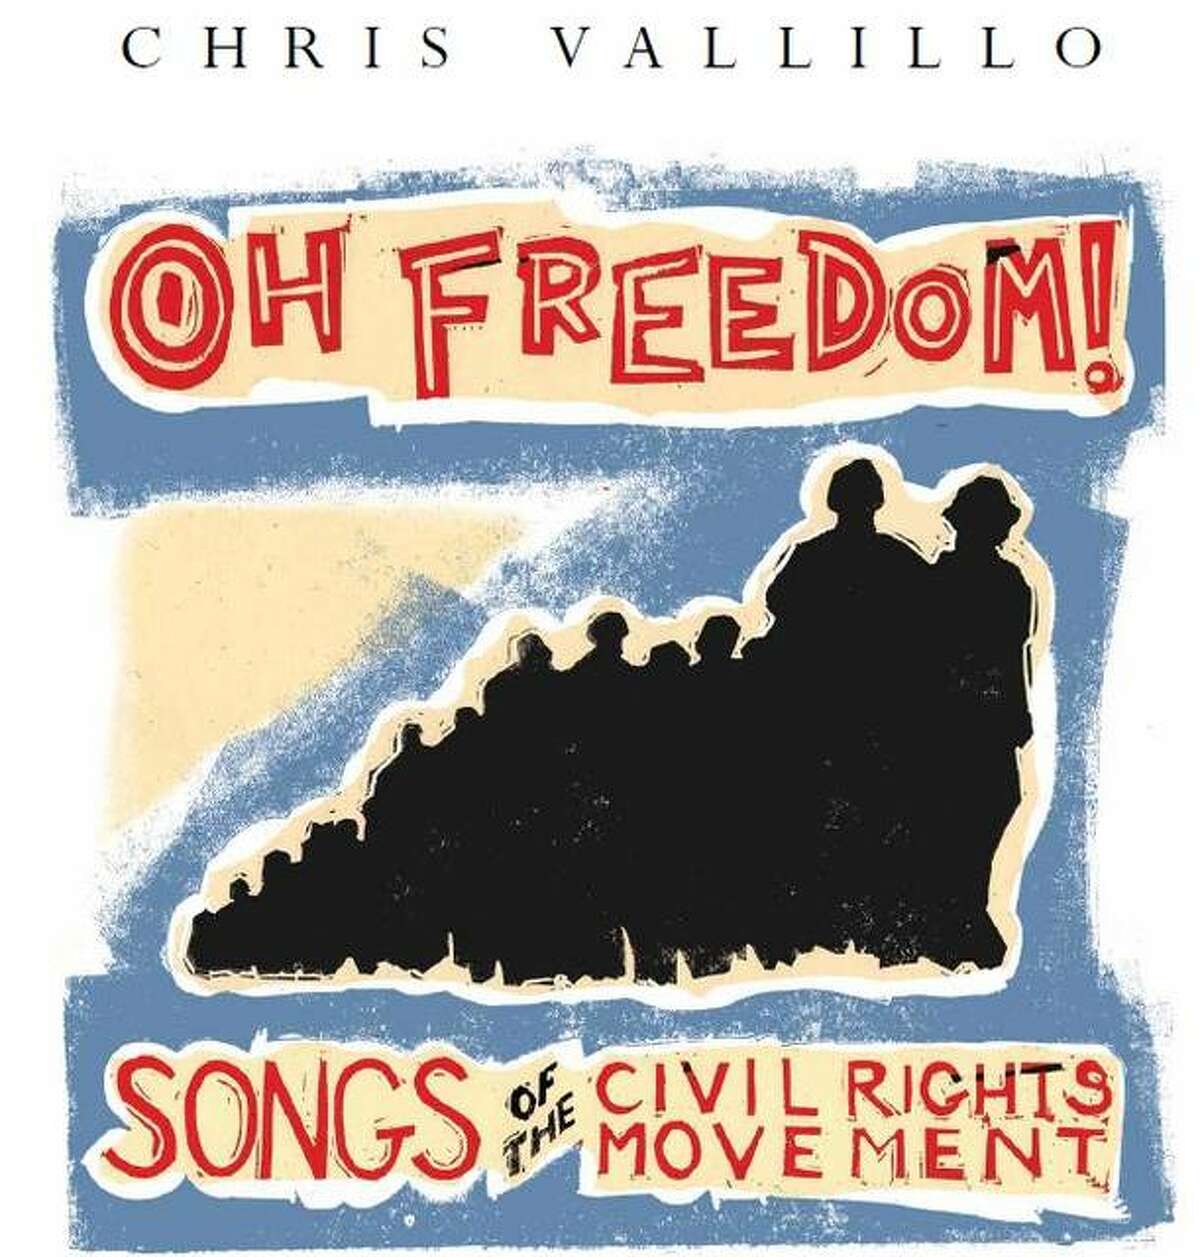 A free concert by award-winning American folksinger Chris Vallillo is planned 1-3 p.m. Monday, July 19, in Room 206 of the Madison County Courthouse Administration Building in Edwardsville.